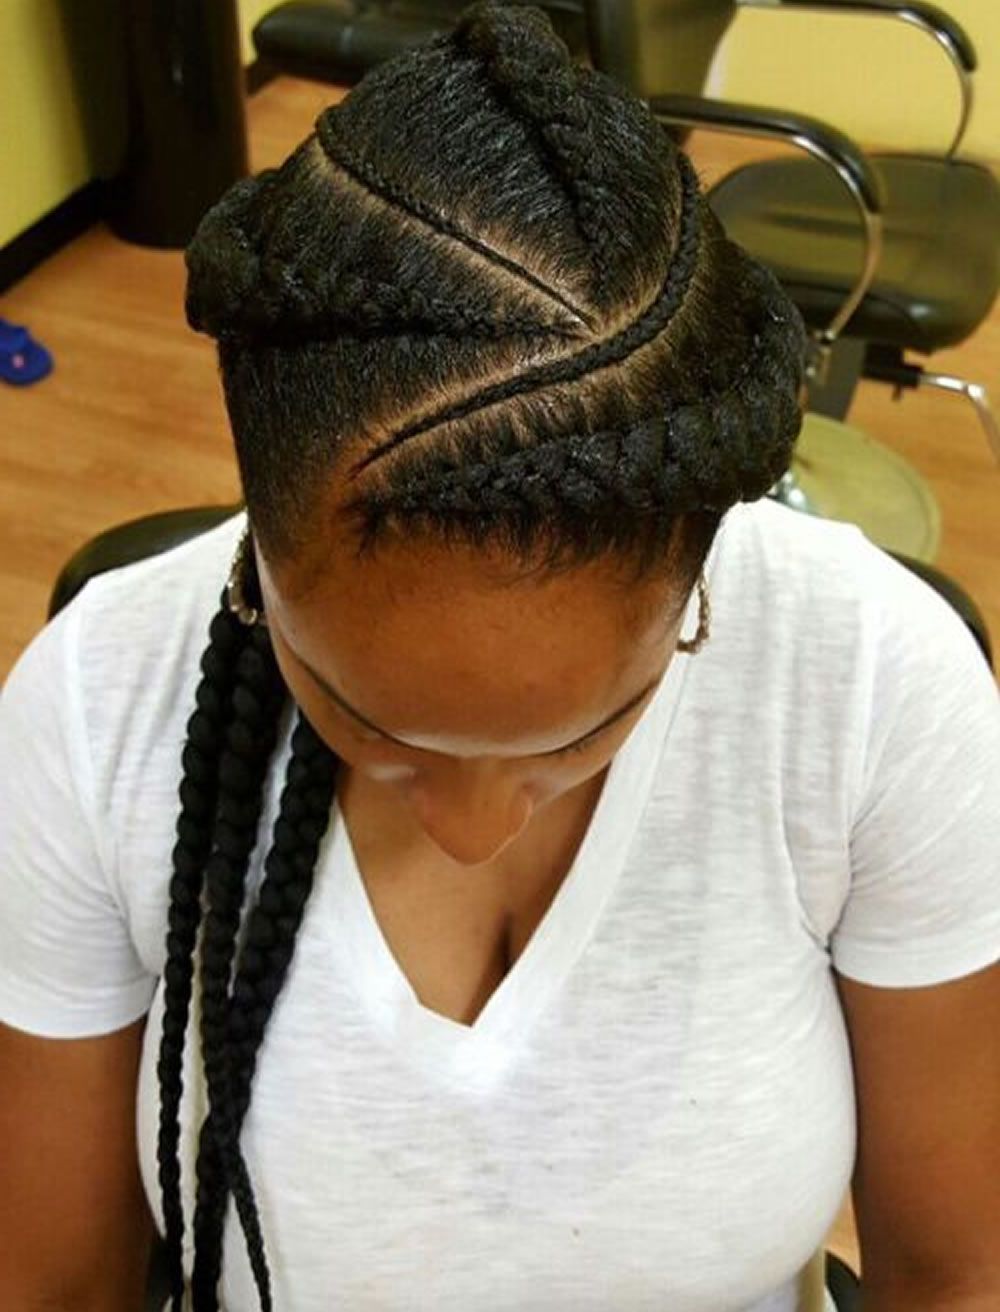 Angled Cornrows With Braided Parts – Hairstyles Inside Fashionable Angled Cornrows Hairstyles With Braided Parts (View 5 of 20)